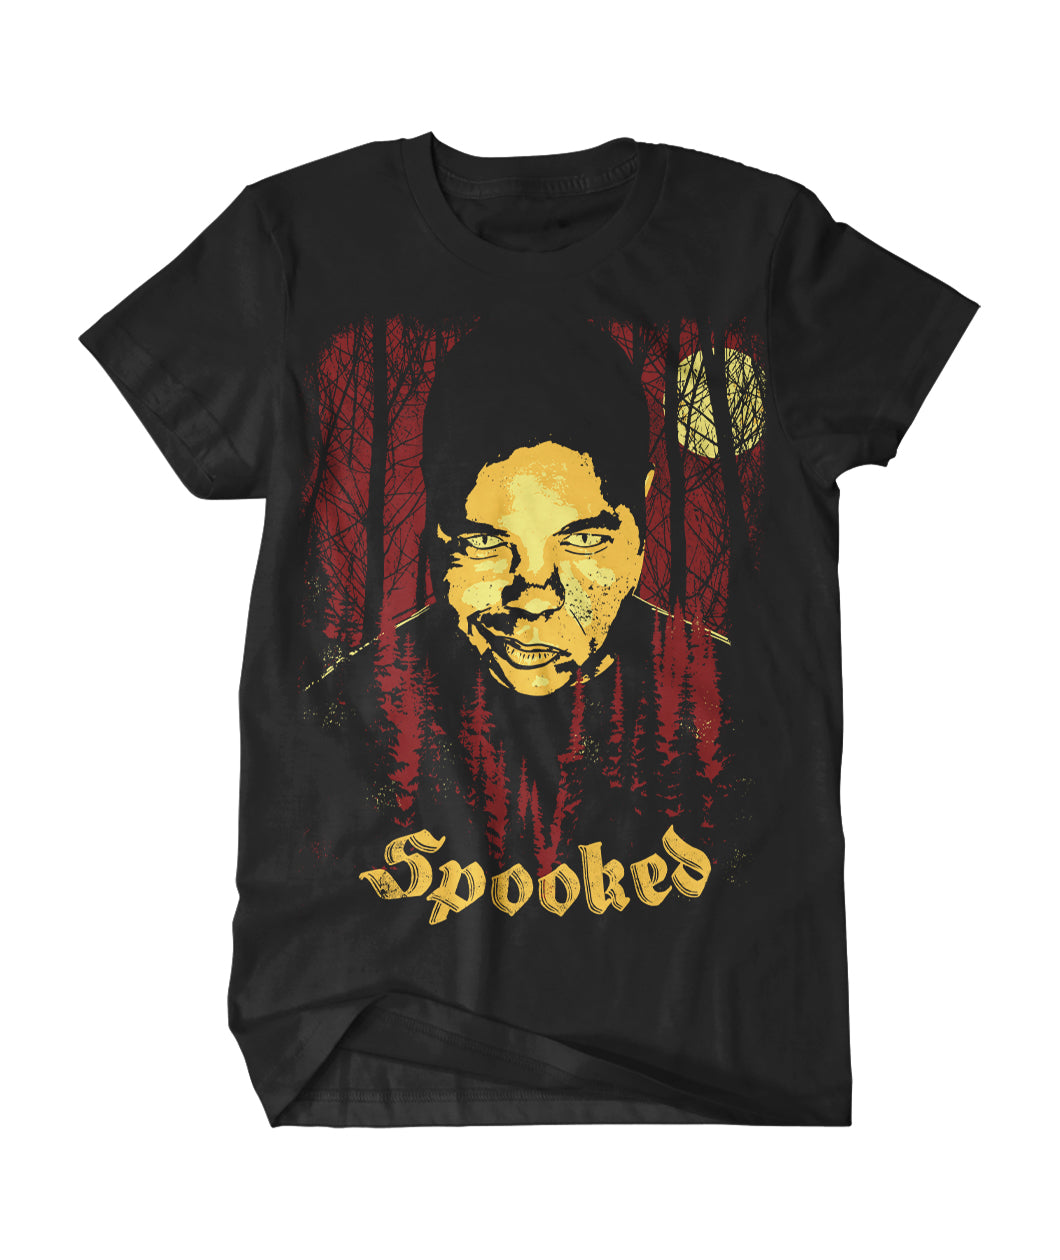 A black t-shirt with a red forest and a full yellow moon. Someone head is poking through the forest. The word "Spooked" is written in yellow across the bottom. From A black and white enamel pin showing the back of a person with headphones on and holding something in their right hand with their left hand raised to the sky. From Snap Judgement.